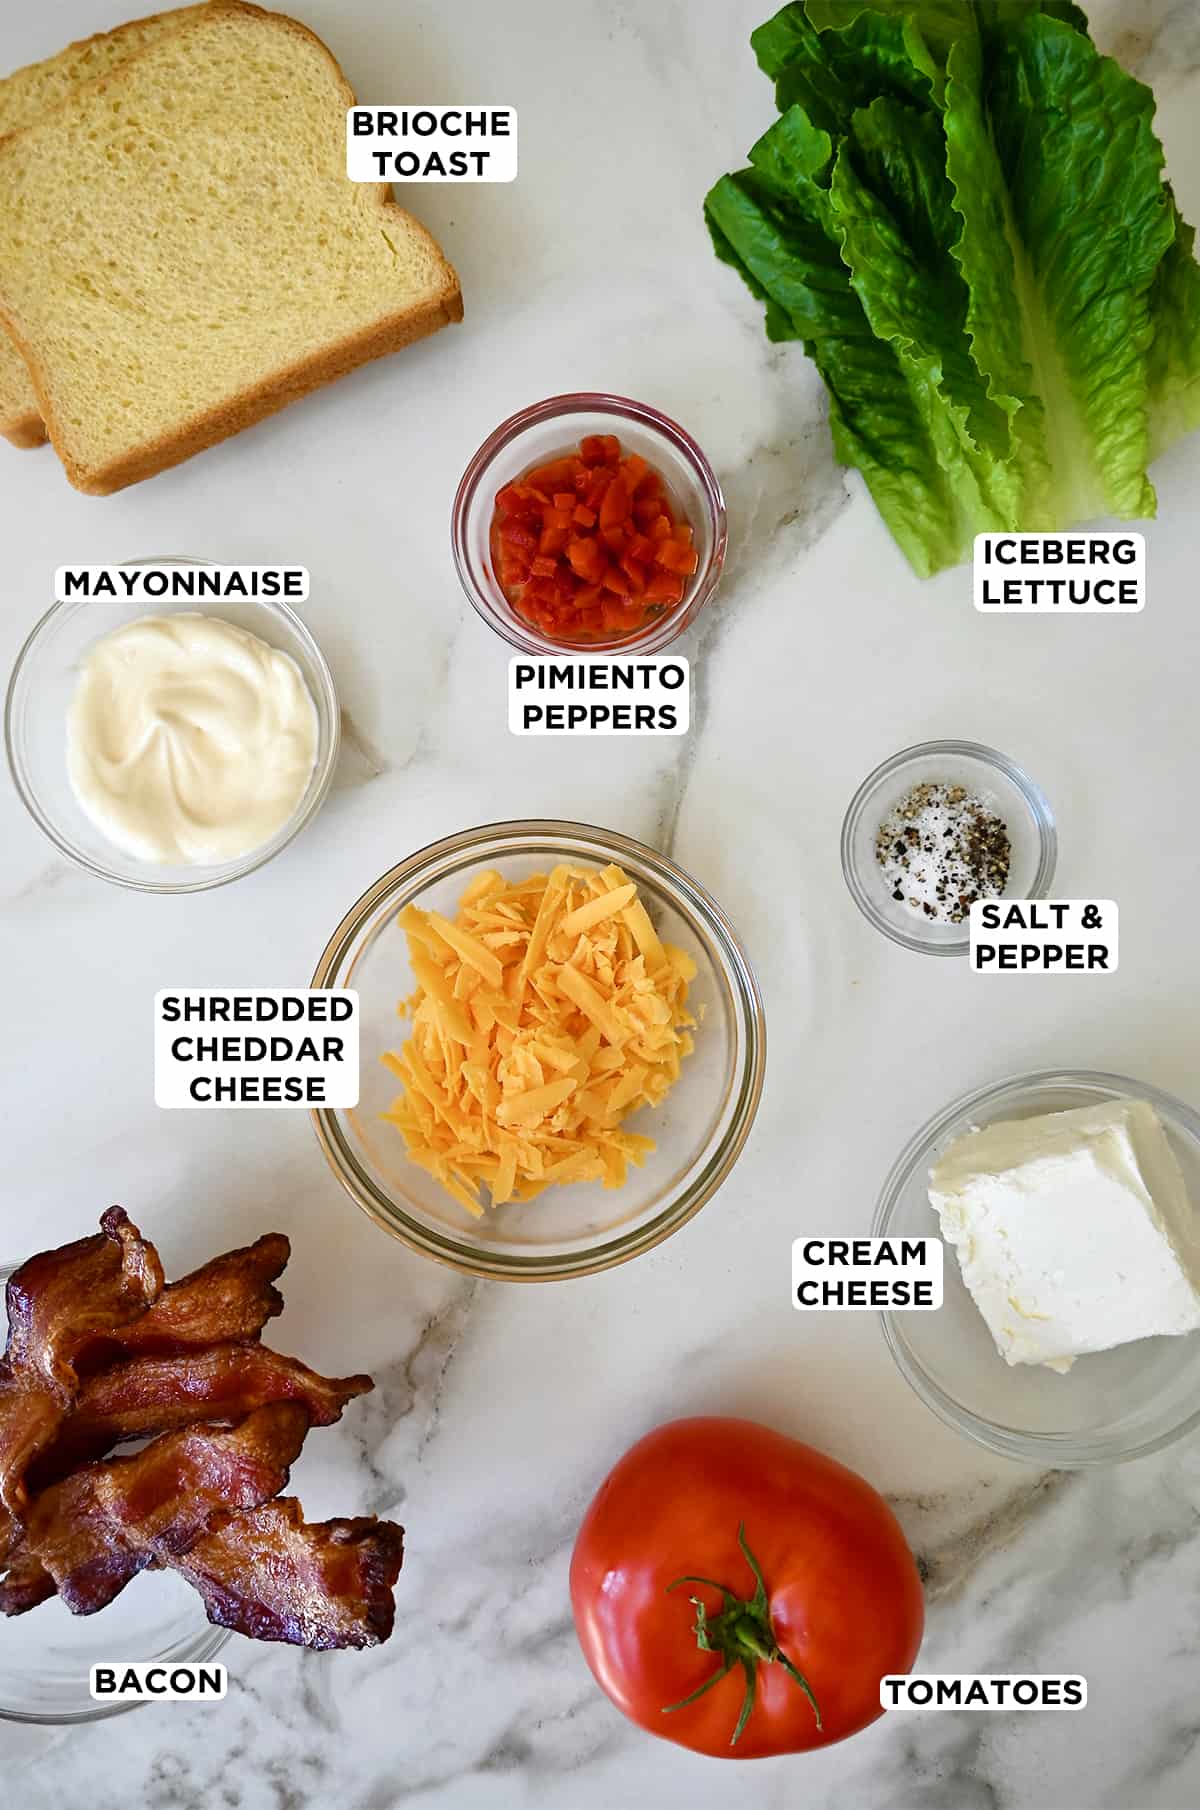 Pimento cheese BLT ingredients in various sizes of glass bowls, including mayo, pimento peppers, salt and pepper, shredded cheddar cheese, cream cheese, romaine lettuce, crispy bacon, tomato slices and slices of brioche bread.